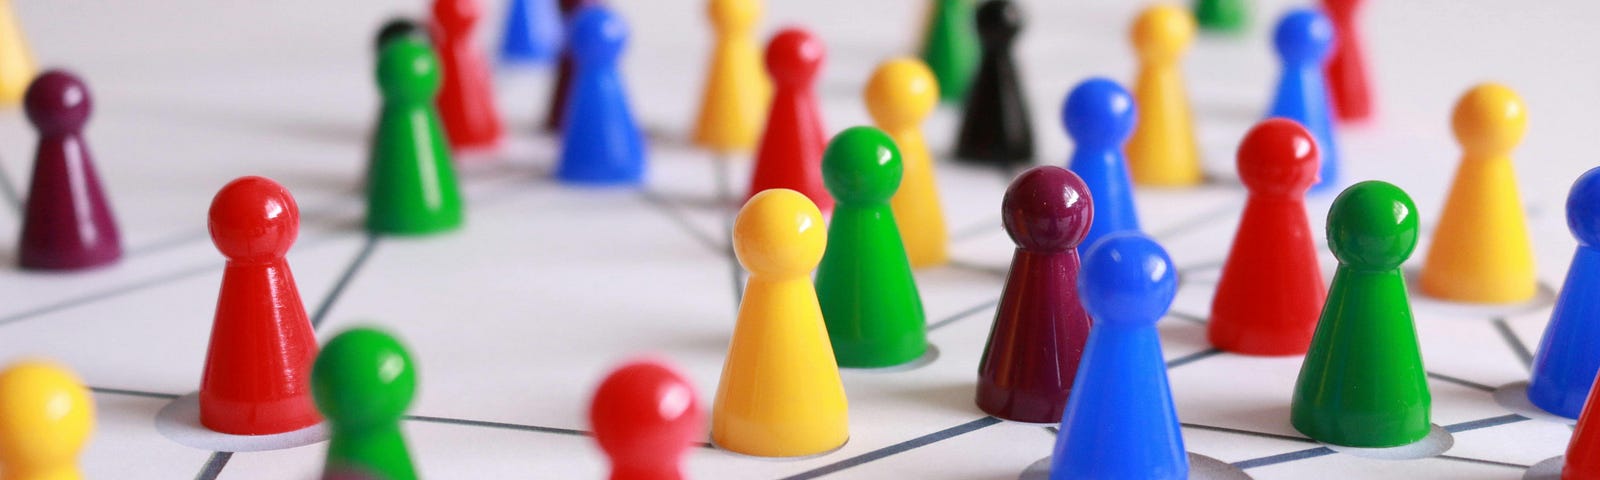 Colourful, plastic, game playing pieces arranged in a network.